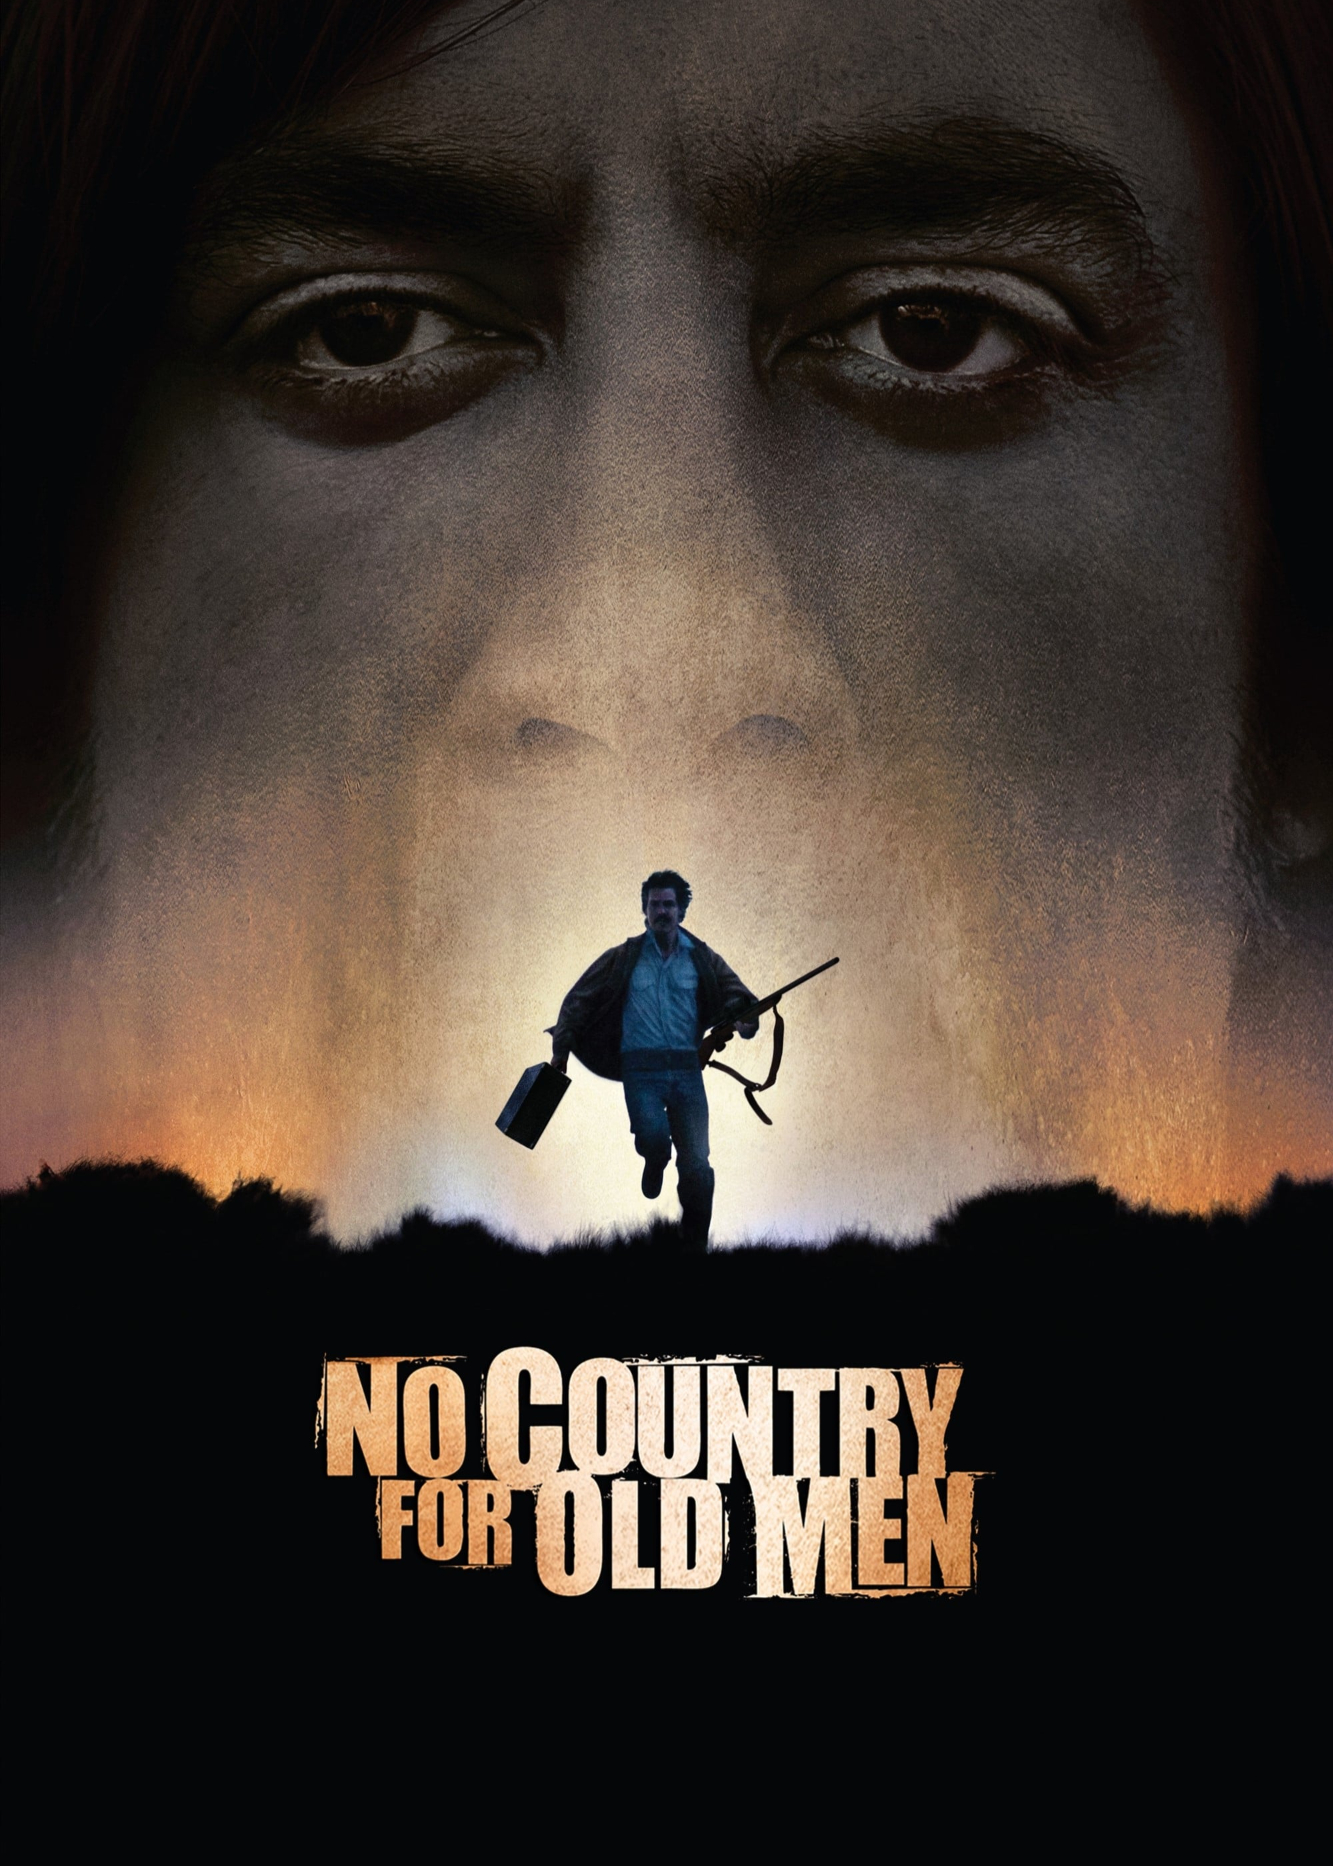 Poster Phim Không Chốn Dung Thân (No Country for Old Men)